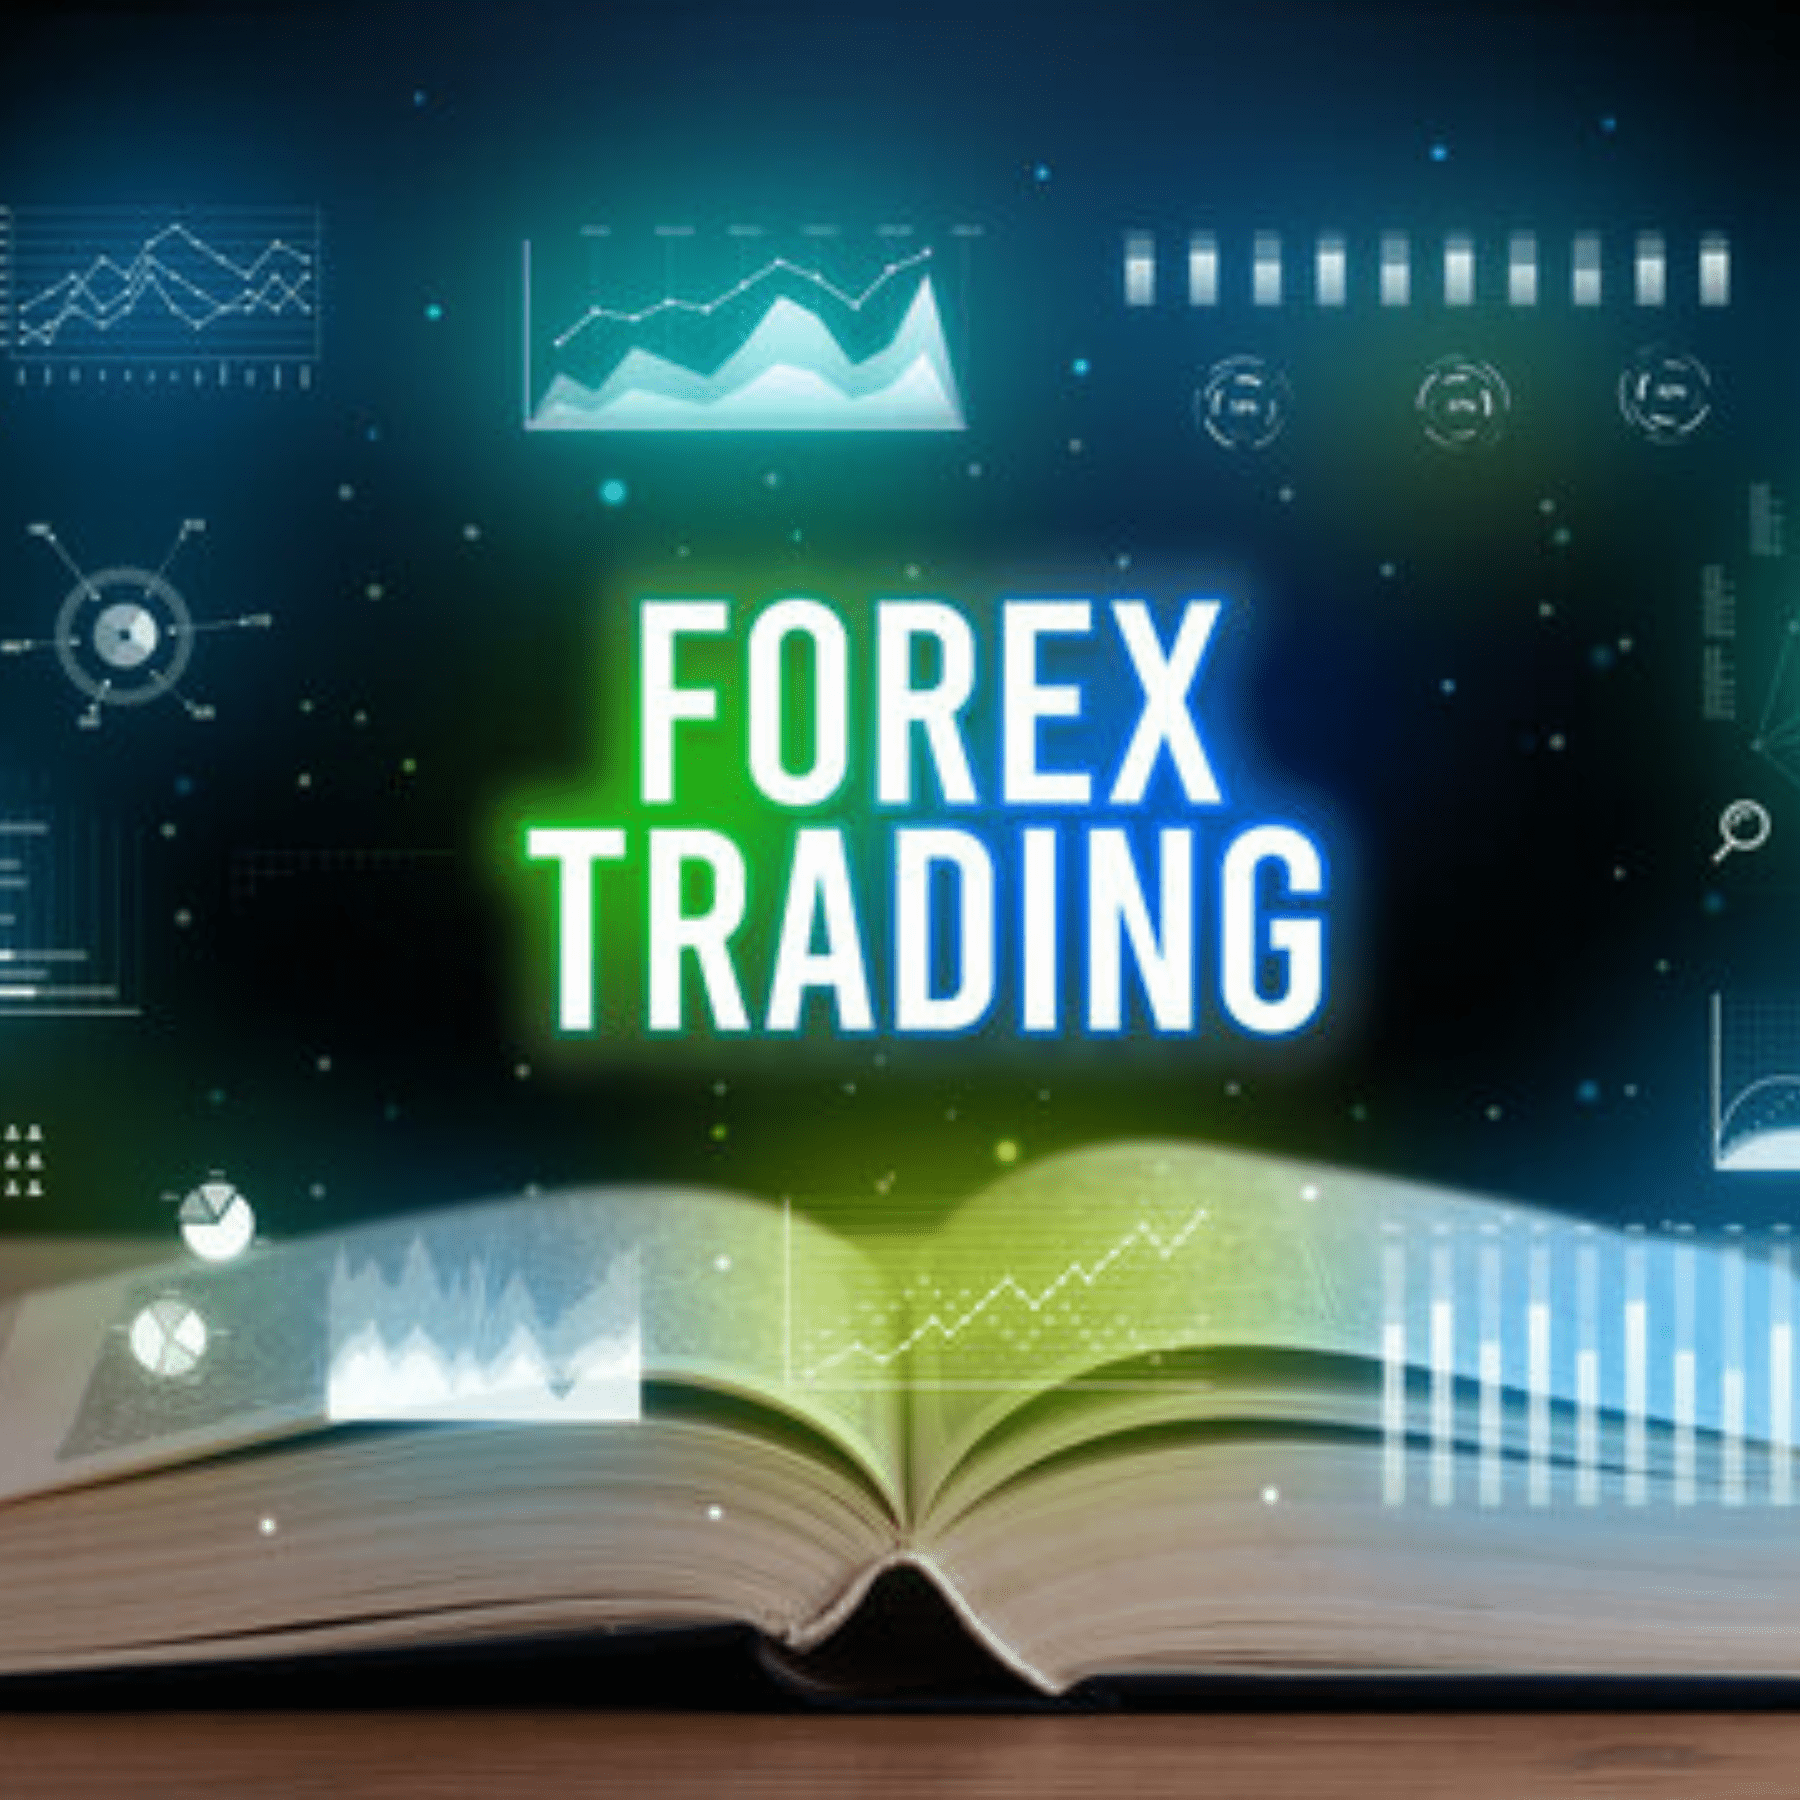 7 Steps to Launch Your Forex Trading Career Successfully